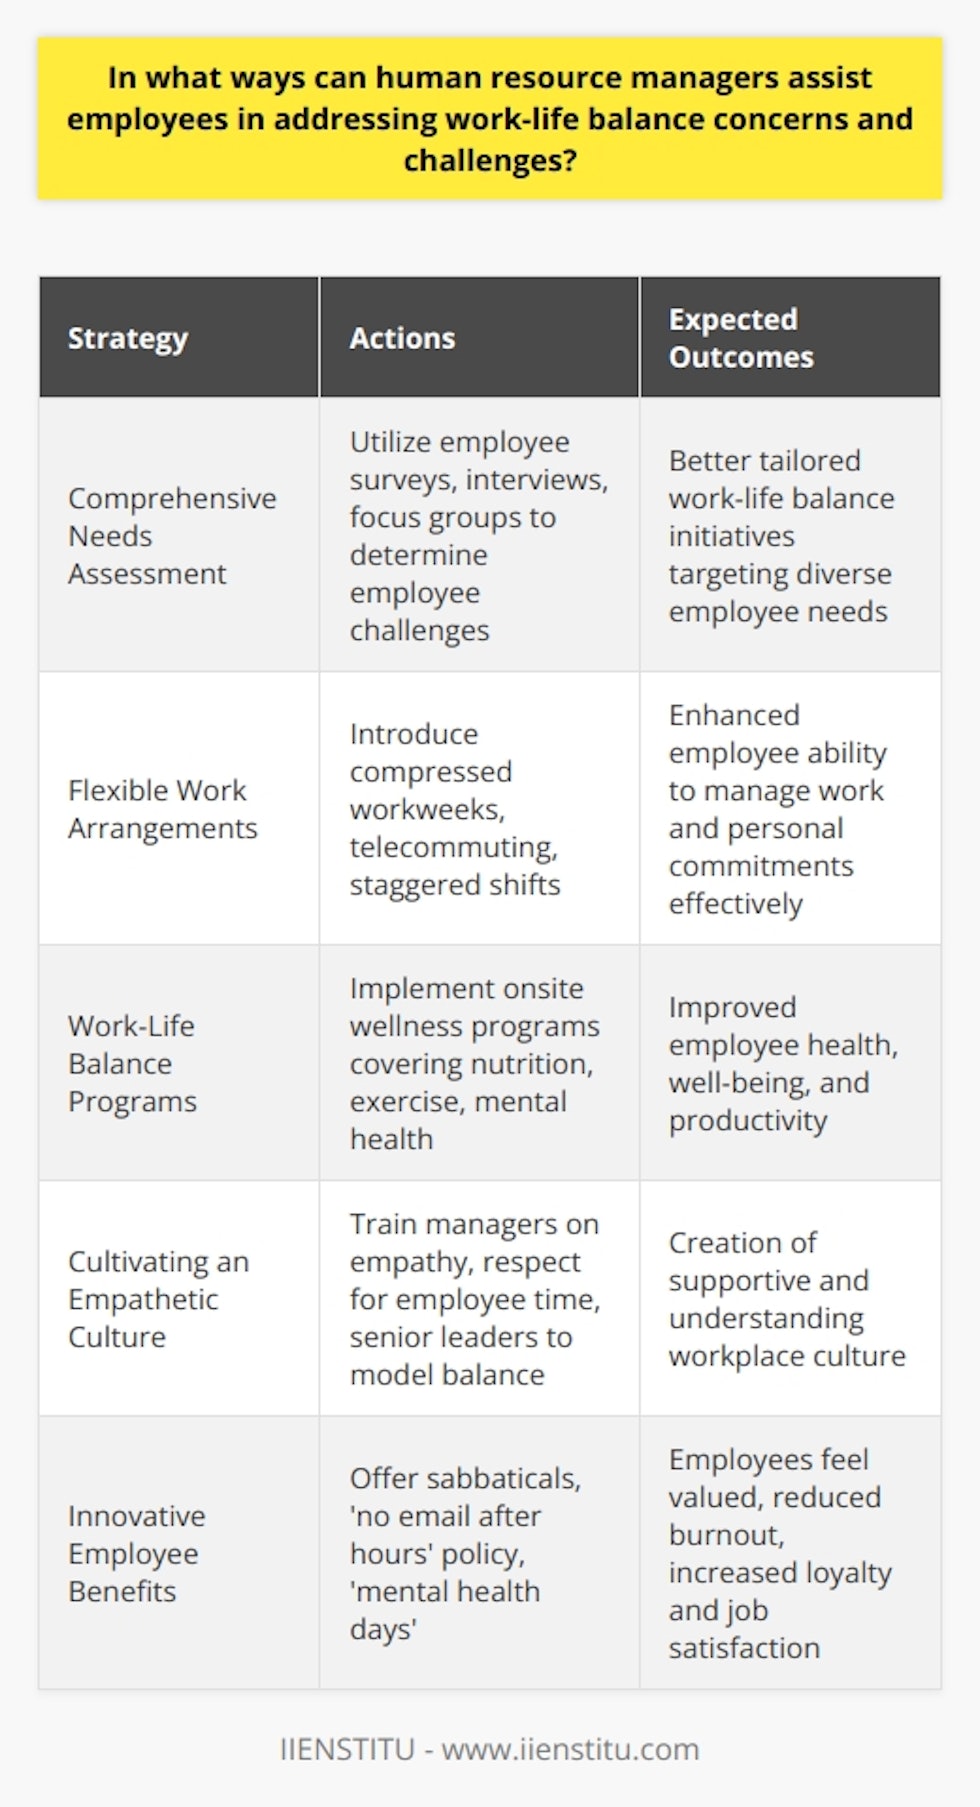 Human resource managers are instrumental in recognizing and addressing the work-life balance concerns that employees face today. By understanding the unique needs of the workforce, HR professionals can implement strategies to help employees manage the demands of both their professional and personal lives. Here’s how HR managers can assist in this regard:**Comprehensive Needs Assessment**A thorough needs assessment is the first step towards creating effective work-life balance initiatives. HR managers can utilize tools such as employee surveys, one-on-one interviews, and focus groups to understand the specific challenges their employees are facing. It's essential to consider the varied demographic and job-related differences when assessing these needs, as they can significantly influence what work-life balance means to different individuals.**Flexible Work Arrangements**The cornerstone of work-life balance often lies within flexible work policies. HR managers can introduce options such as compressed workweeks, telecommuting, or staggered shifts. Such policies allow employees to tailor their work schedules to better fit their lifestyle, family needs, or even to avoid peak traffic hours, substantially enhancing their work-life balance.**Work-Life Balance Programs**Beyond flexibility in scheduling, HR managers can create programs specifically geared towards enriching employees’ lives outside of work. This might include onsite wellness programs that cover aspects like nutrition, exercise, and mental health. Ensuring employees have the resources to manage their stress and maintain health is an indirect yet impactful way HR can support work-life balance.**Cultivating an Empathetic Culture**Promoting a supportive work culture is vital for work-life balance to thrive. HR managers can lead by example—encouraging senior leaders to showcase their own work-life balance and support their teams in finding theirs. Training programs for managers emphasizing empathy and the importance of respecting employees' time both in and outside of work can instill a culture that champions balance.**Innovative Employee Benefits**HR managers can think outside the box when it comes to employee benefits. Creative solutions might include offering sabbaticals, setting up a company-wide 'no email after hours' policy, or giving 'mental health days' in addition to the usual sick leave. Unique approaches to benefits can resonate well with employees looking for organizations that understand and value the importance of life beyond work.By implementing these measures, human resource managers at organizations, such as IIENSTITU, can help alleviate the stress of juggling office and home life, allowing employees to engage more wholly with both. Addressing work-life balance is not just about fostering a happier workforce but also driving workplace efficiency, as a contented employee is invariably a more productive one.